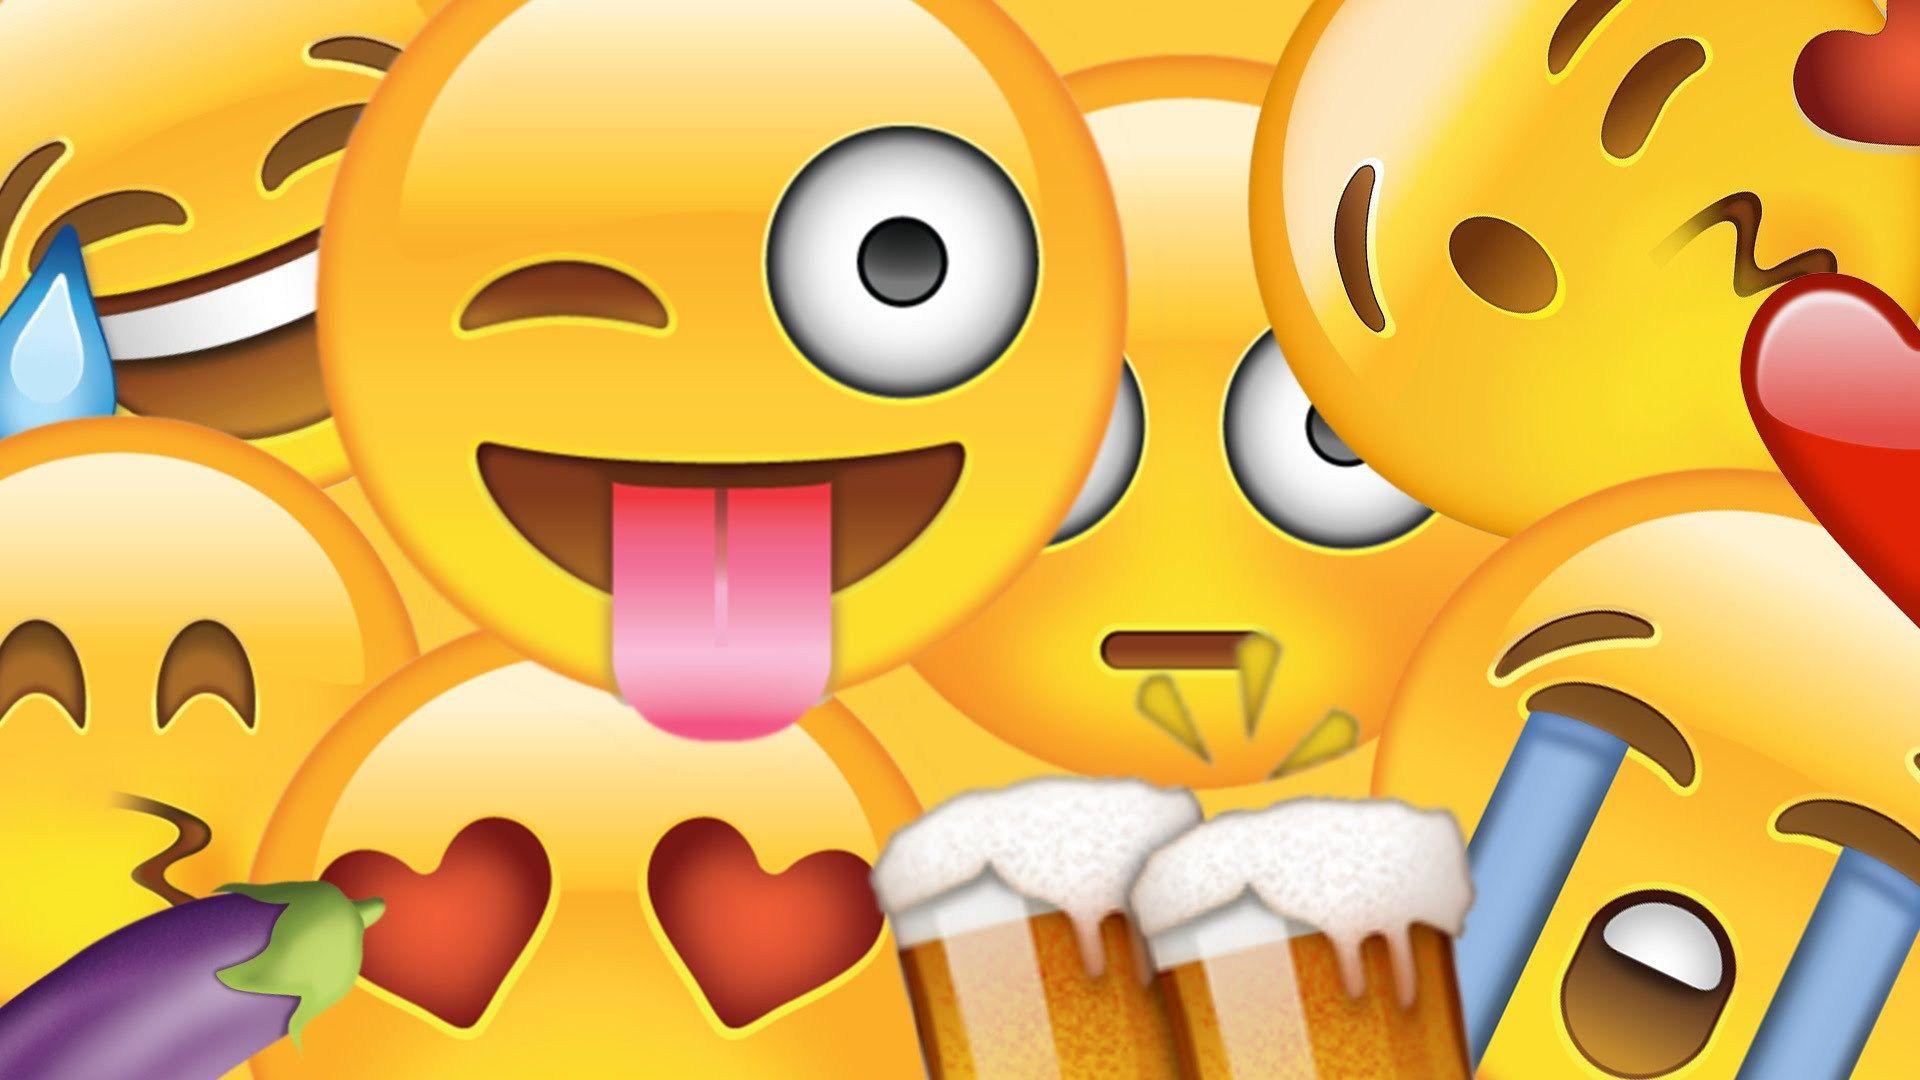 The Good, The Bad and The Ugly: Why Emojis Are Taking Over